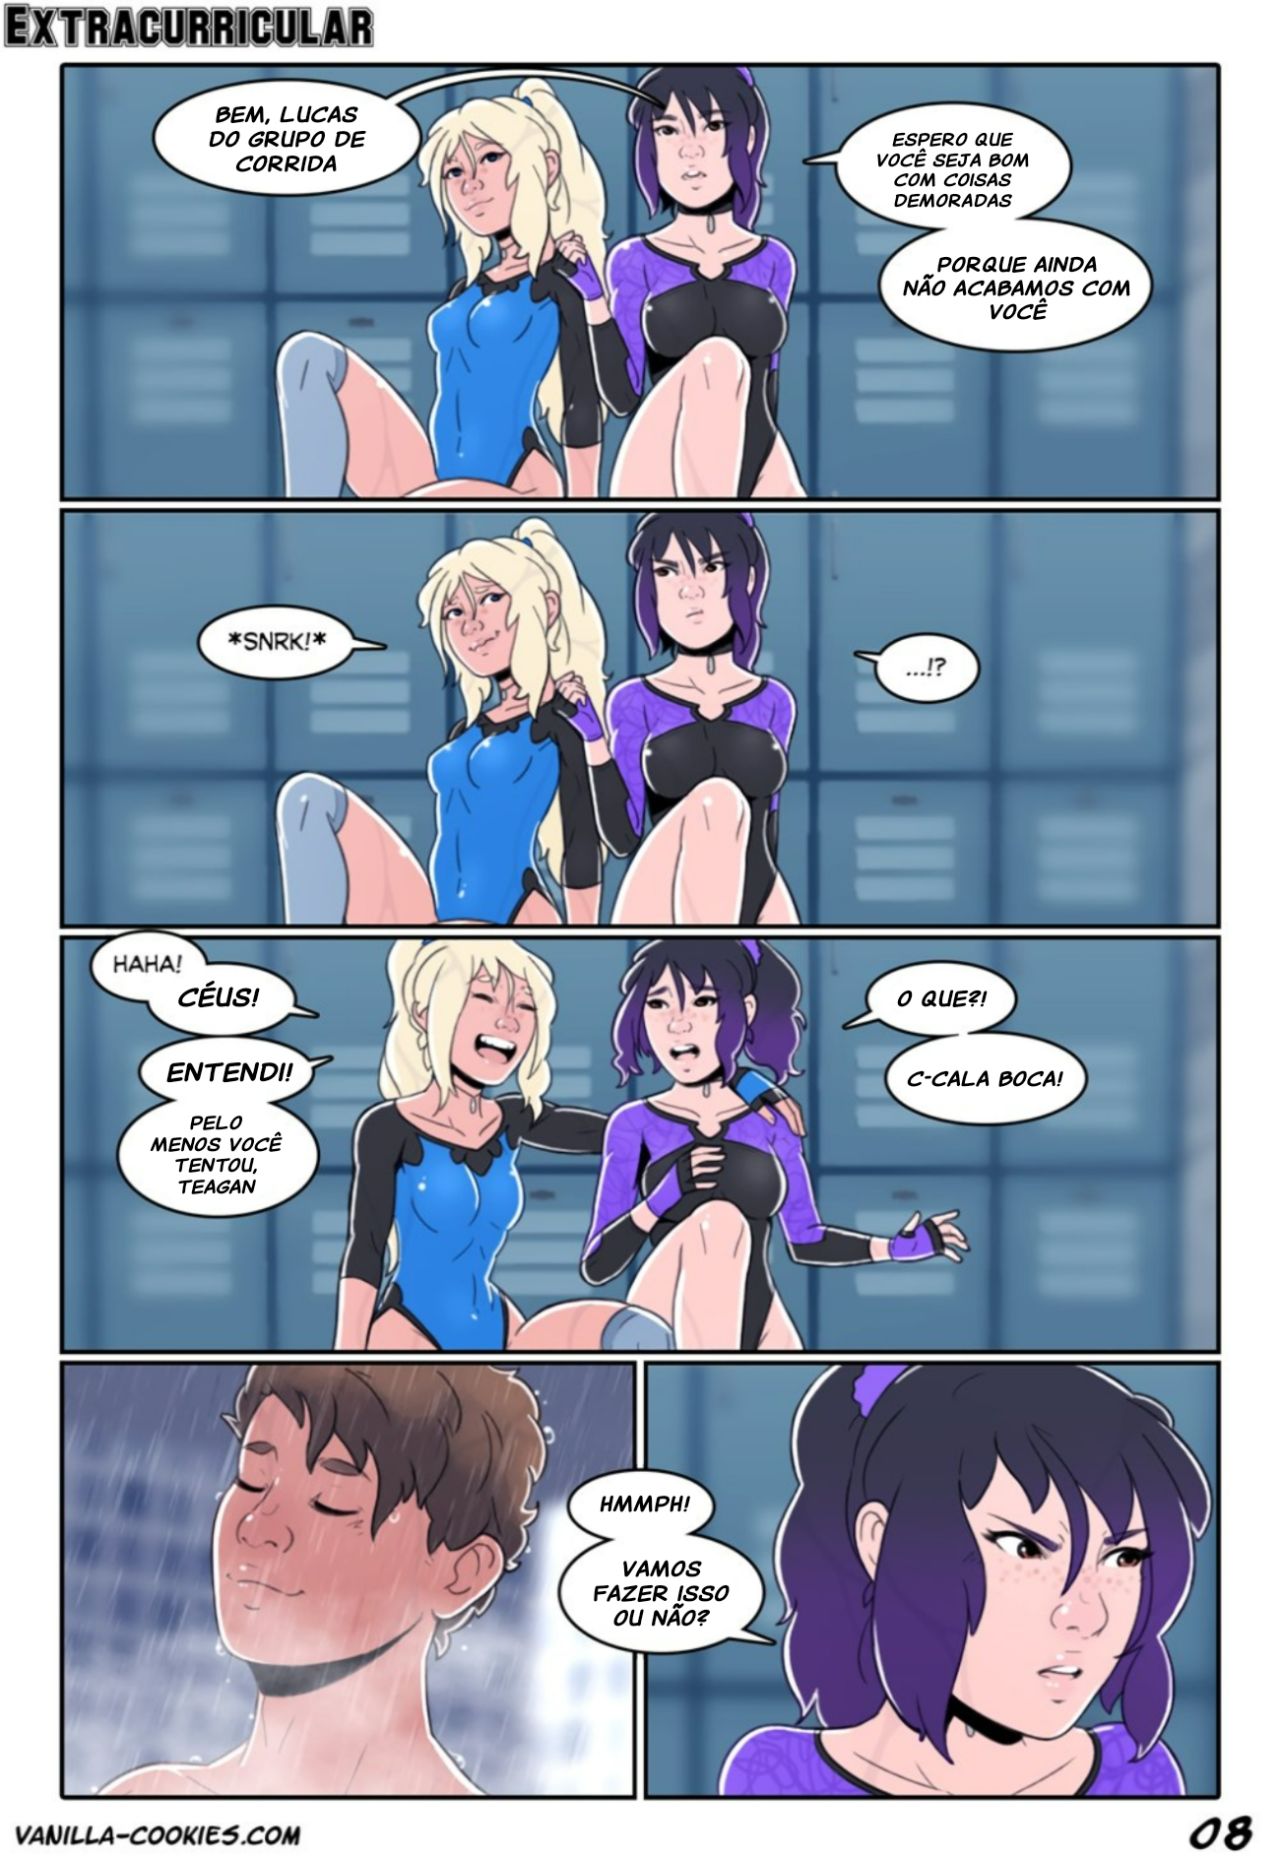 Extracurricular part 2 Hentai pt-br 09